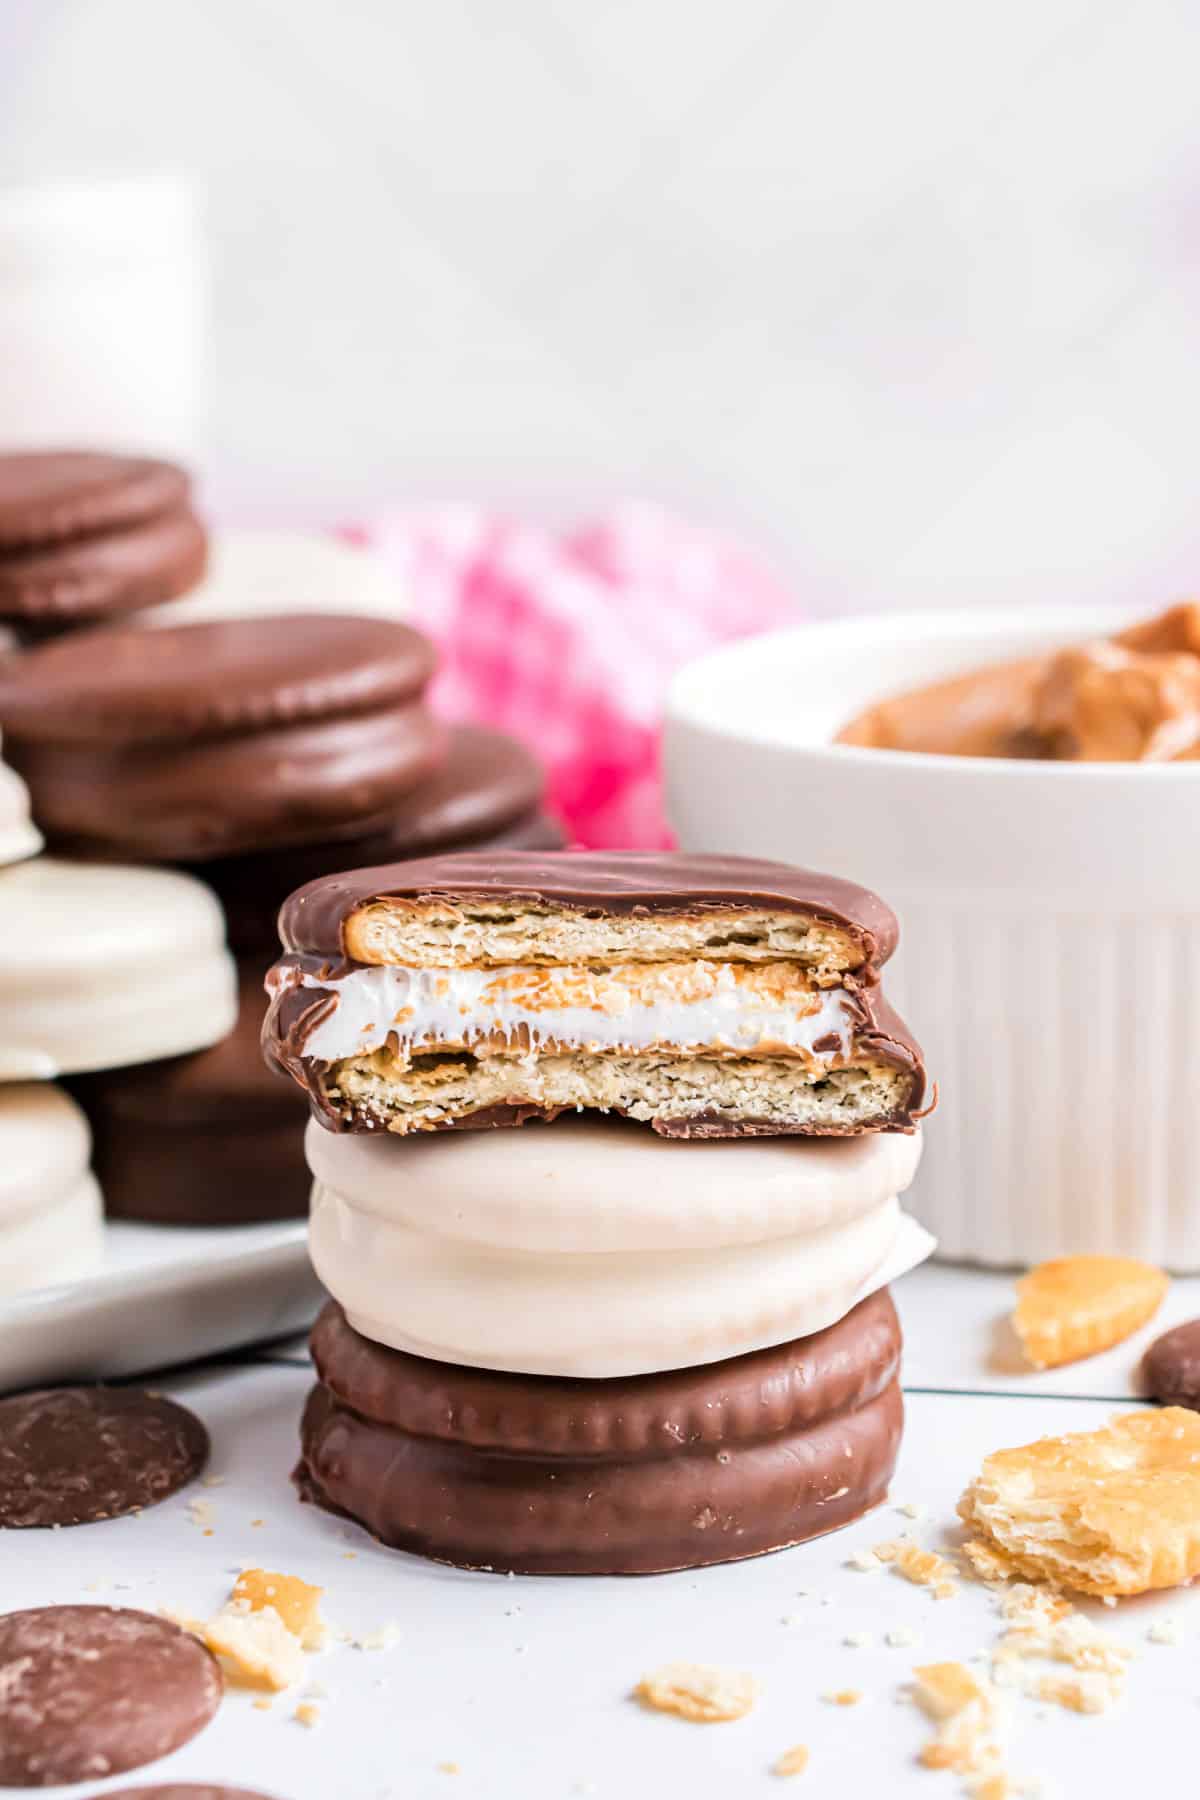 Ritz crackers filled with peanut butter and marshmallow fluff then dipped in chocolate.